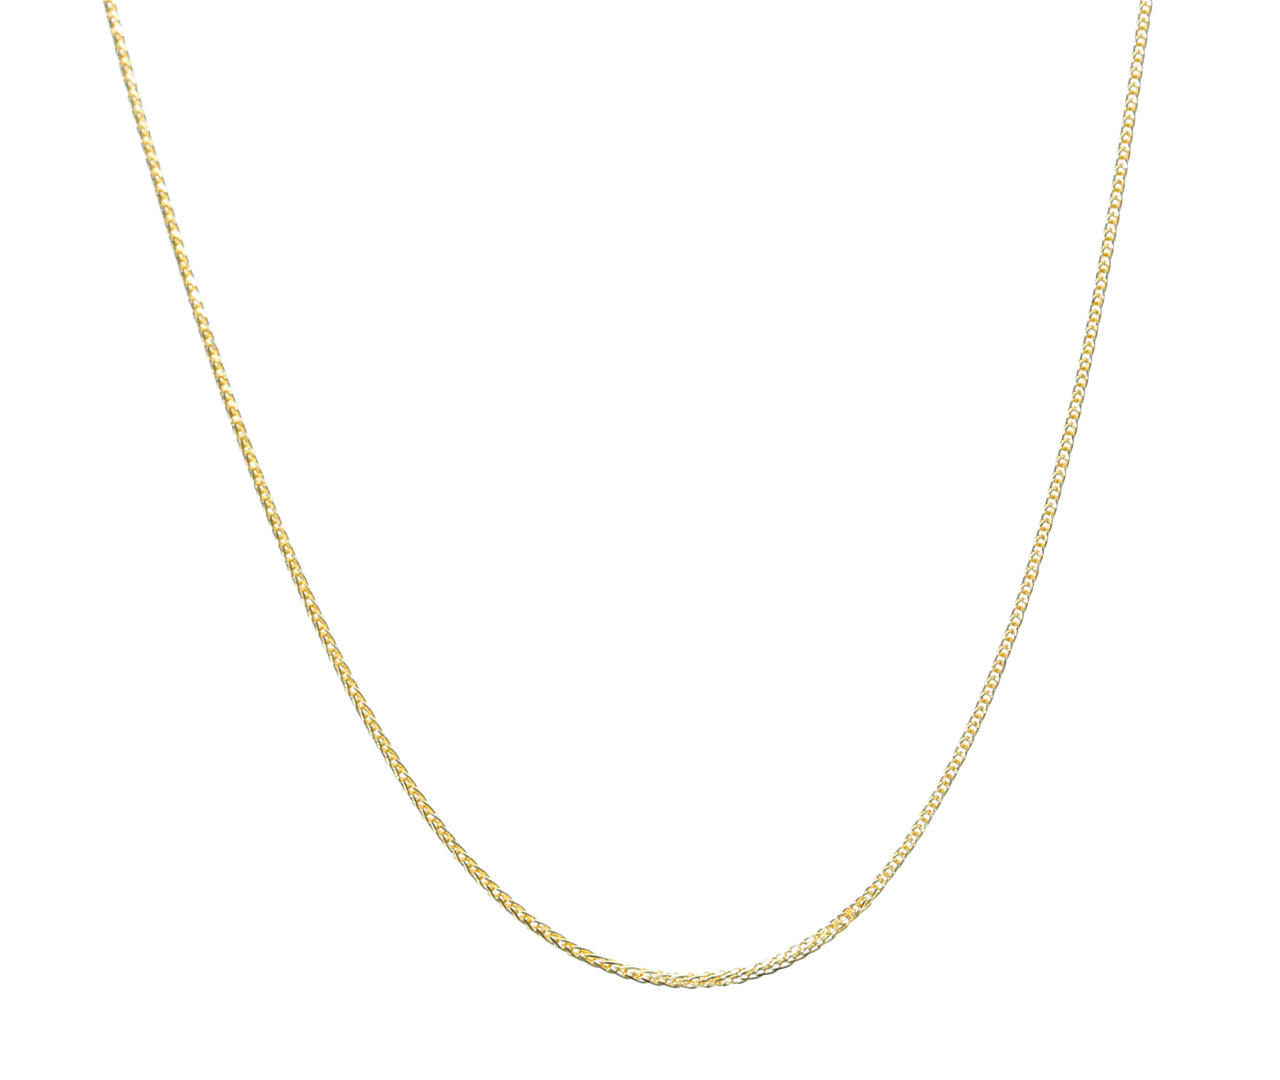 Wheat 24k Gold Chain 16 Inches